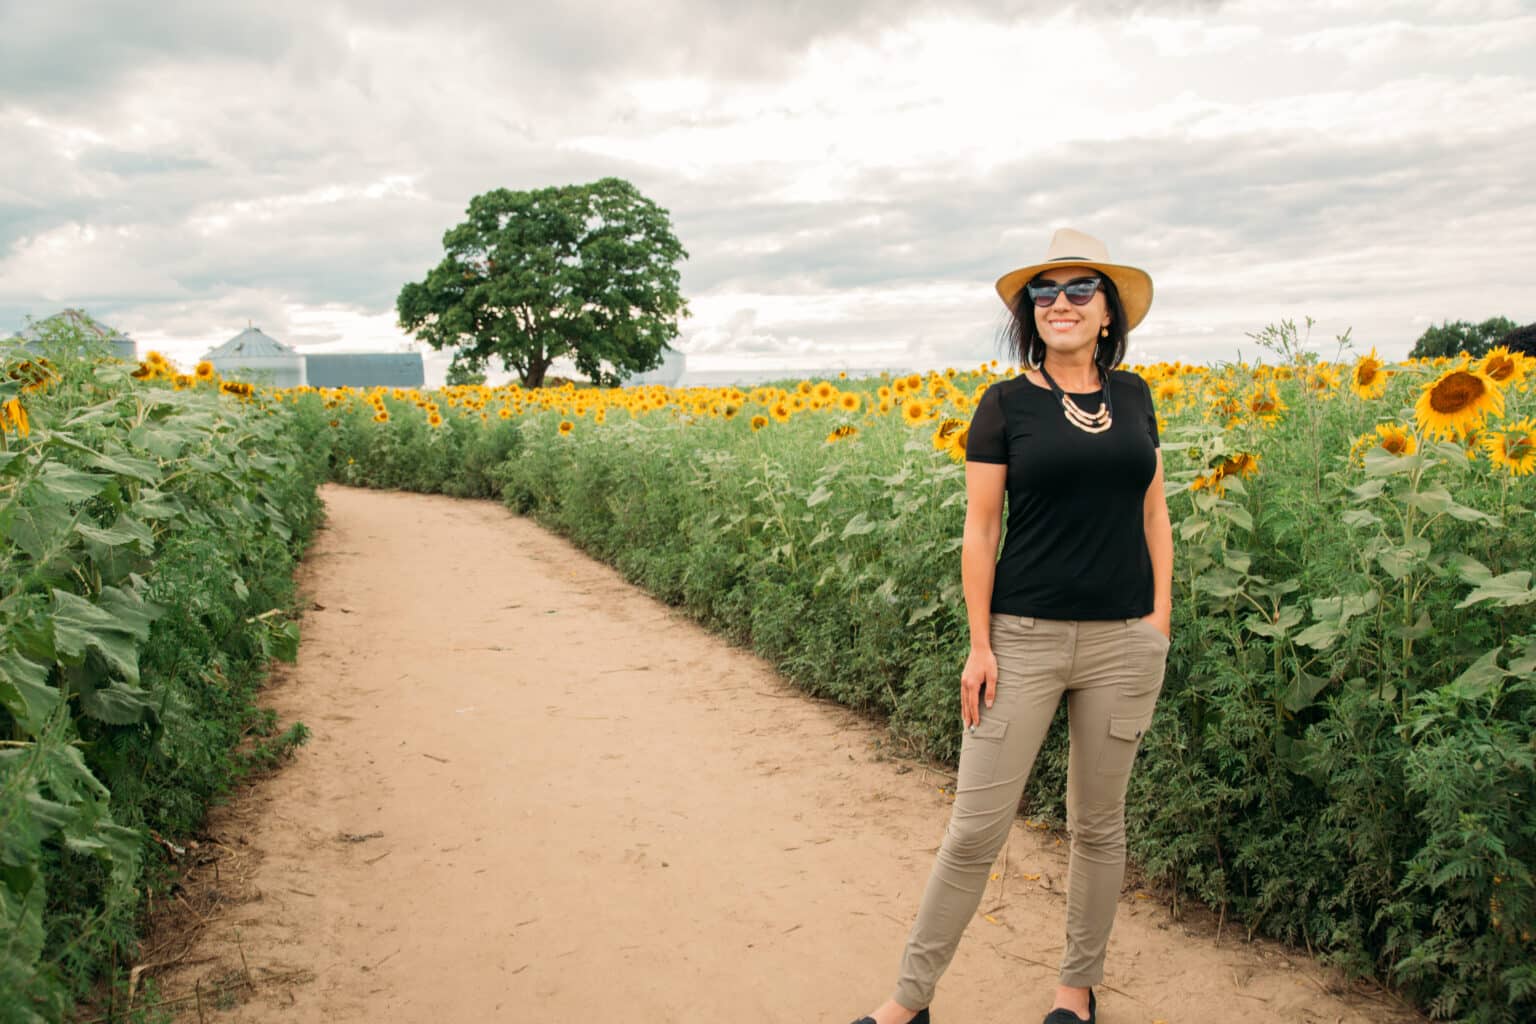 Lindsey wearing a straw fedora and Anatomie clothing while standing in a sunflower field